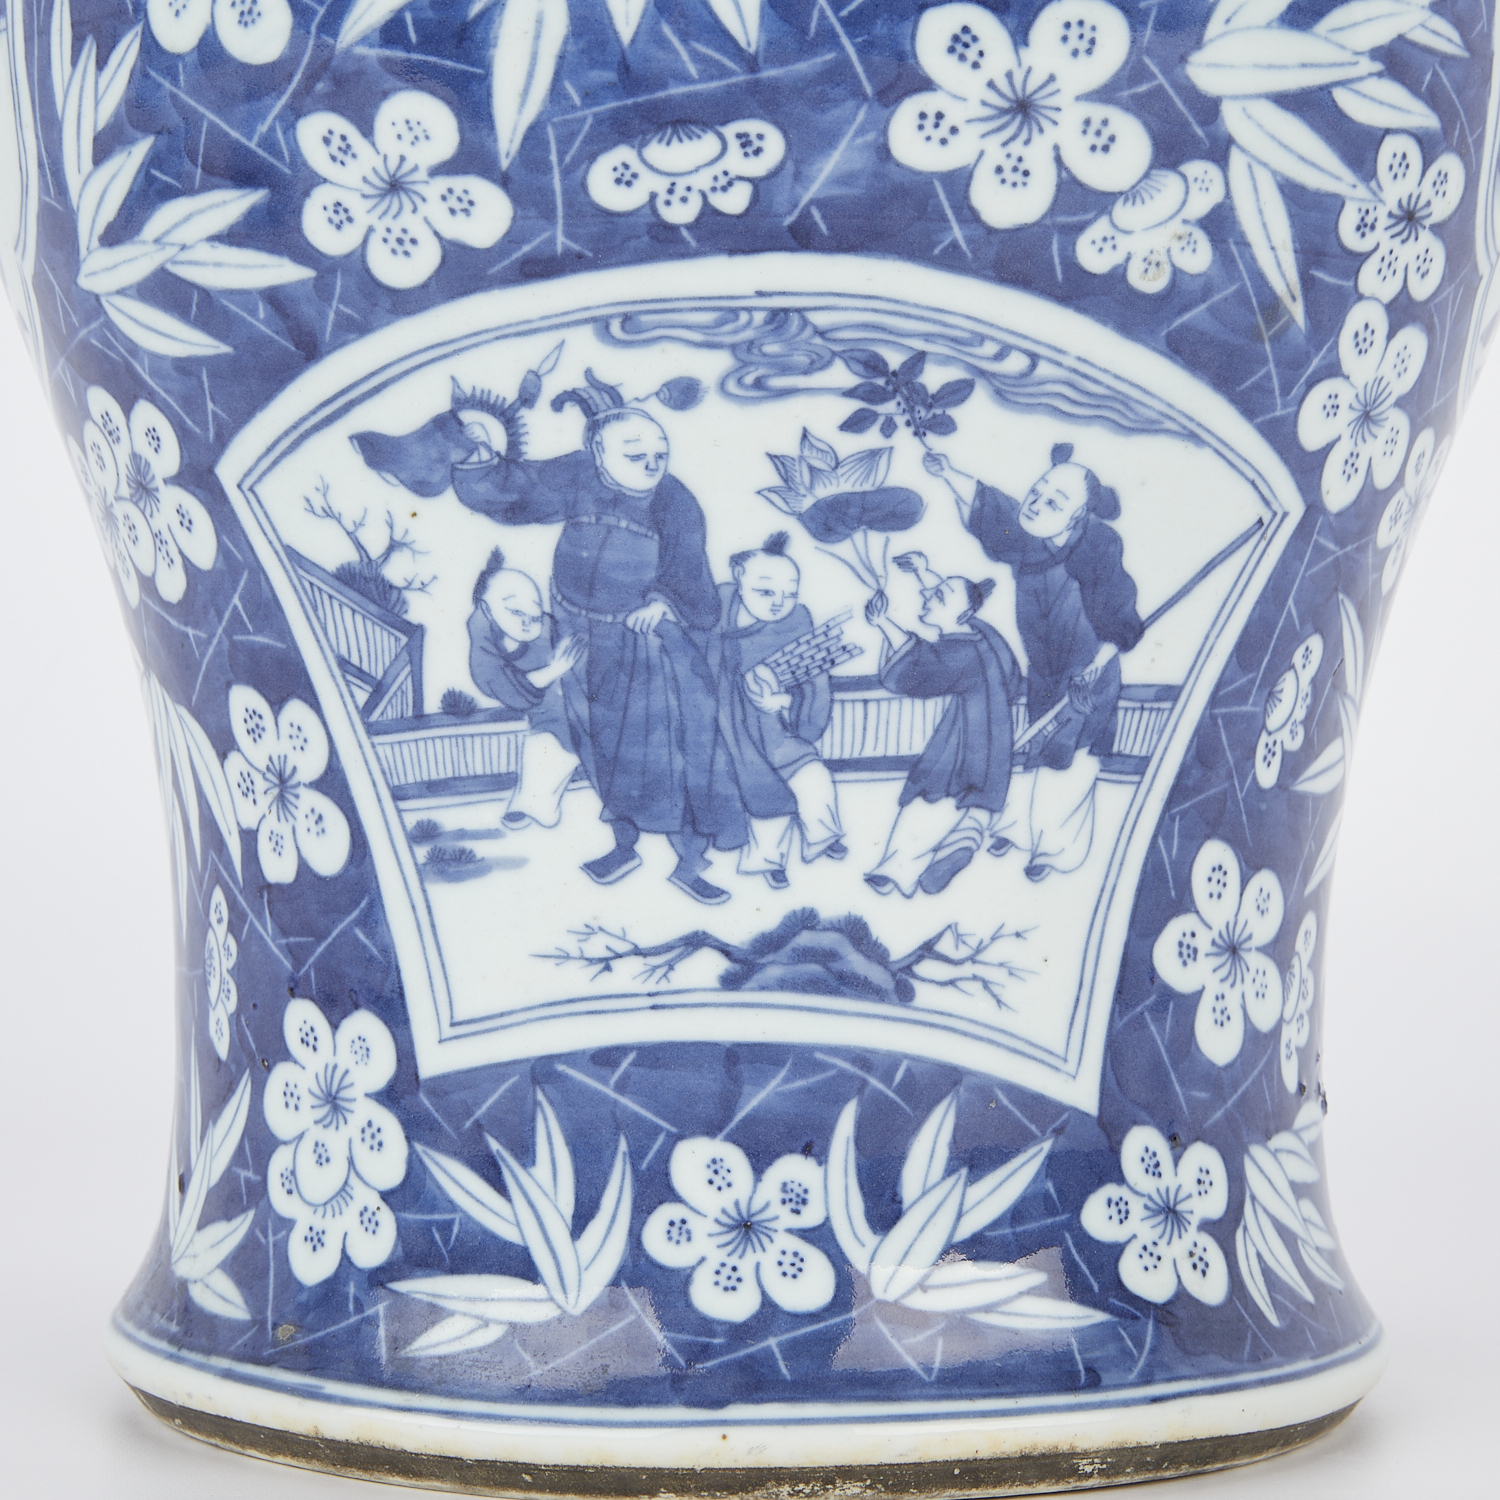 18th/19th c. Chinese B&W Porcelain Baluster Vase - Image 10 of 15